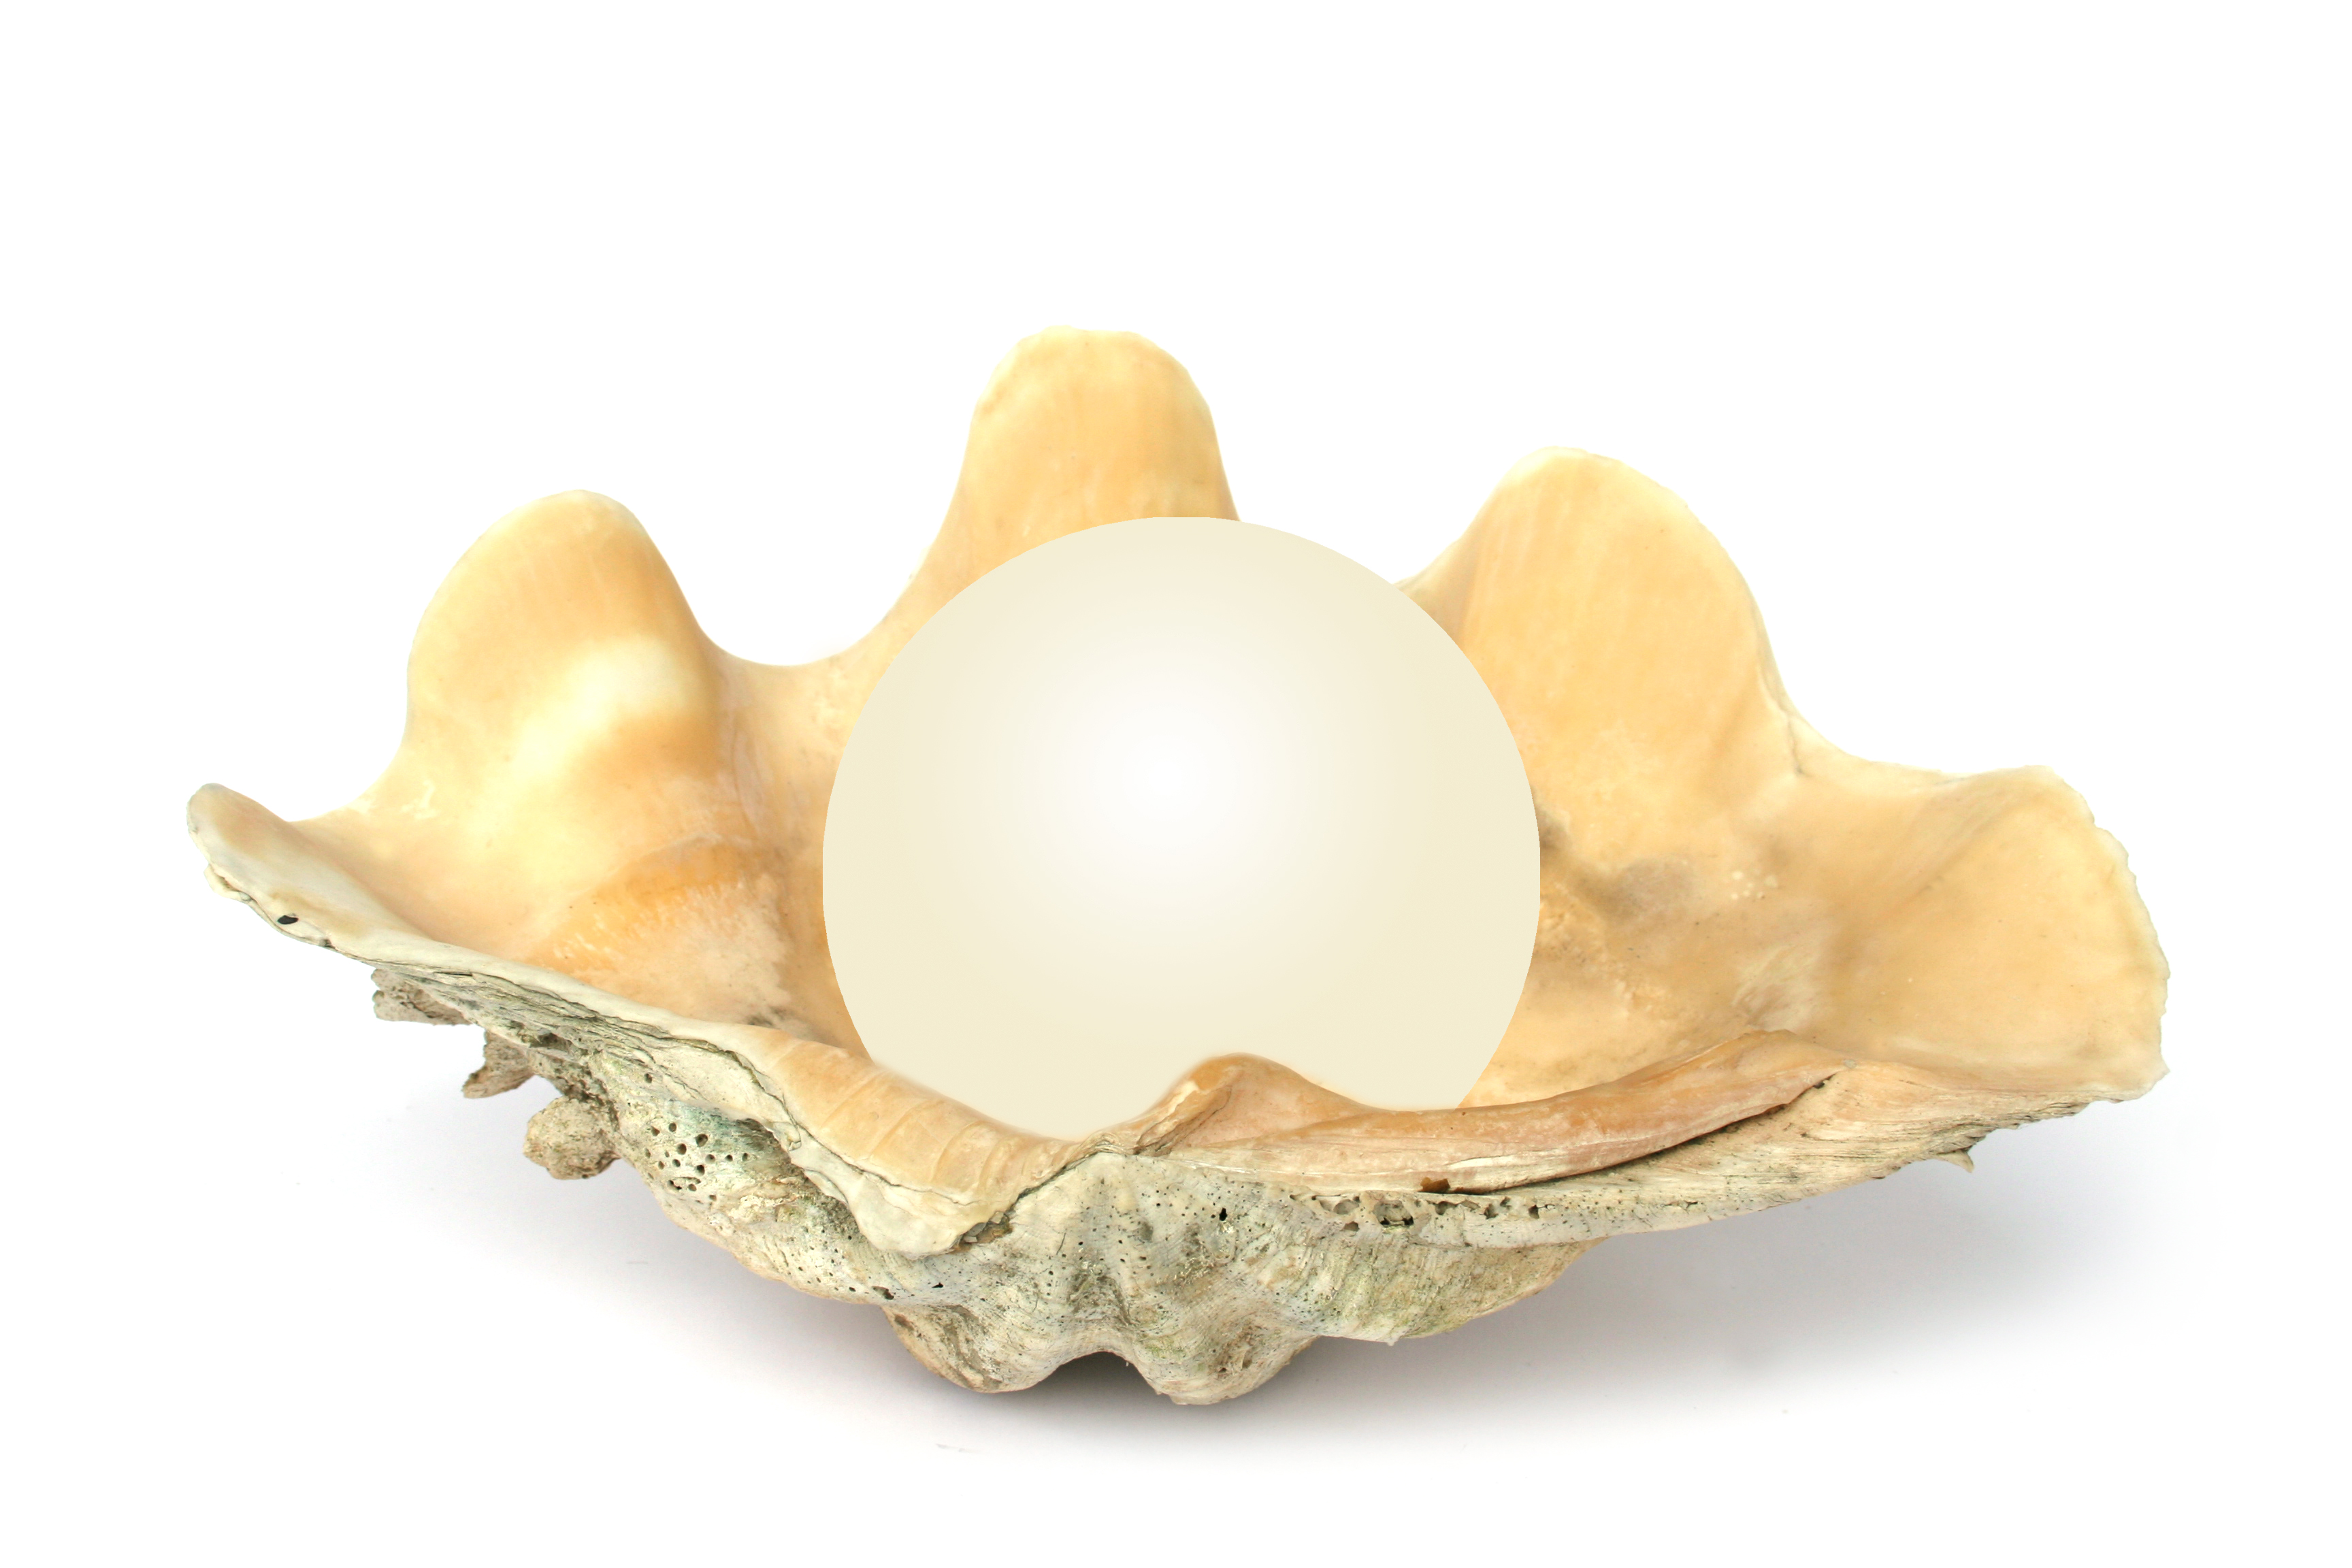 enough matching stones for a pearl necklace? That's a lot of oysters!